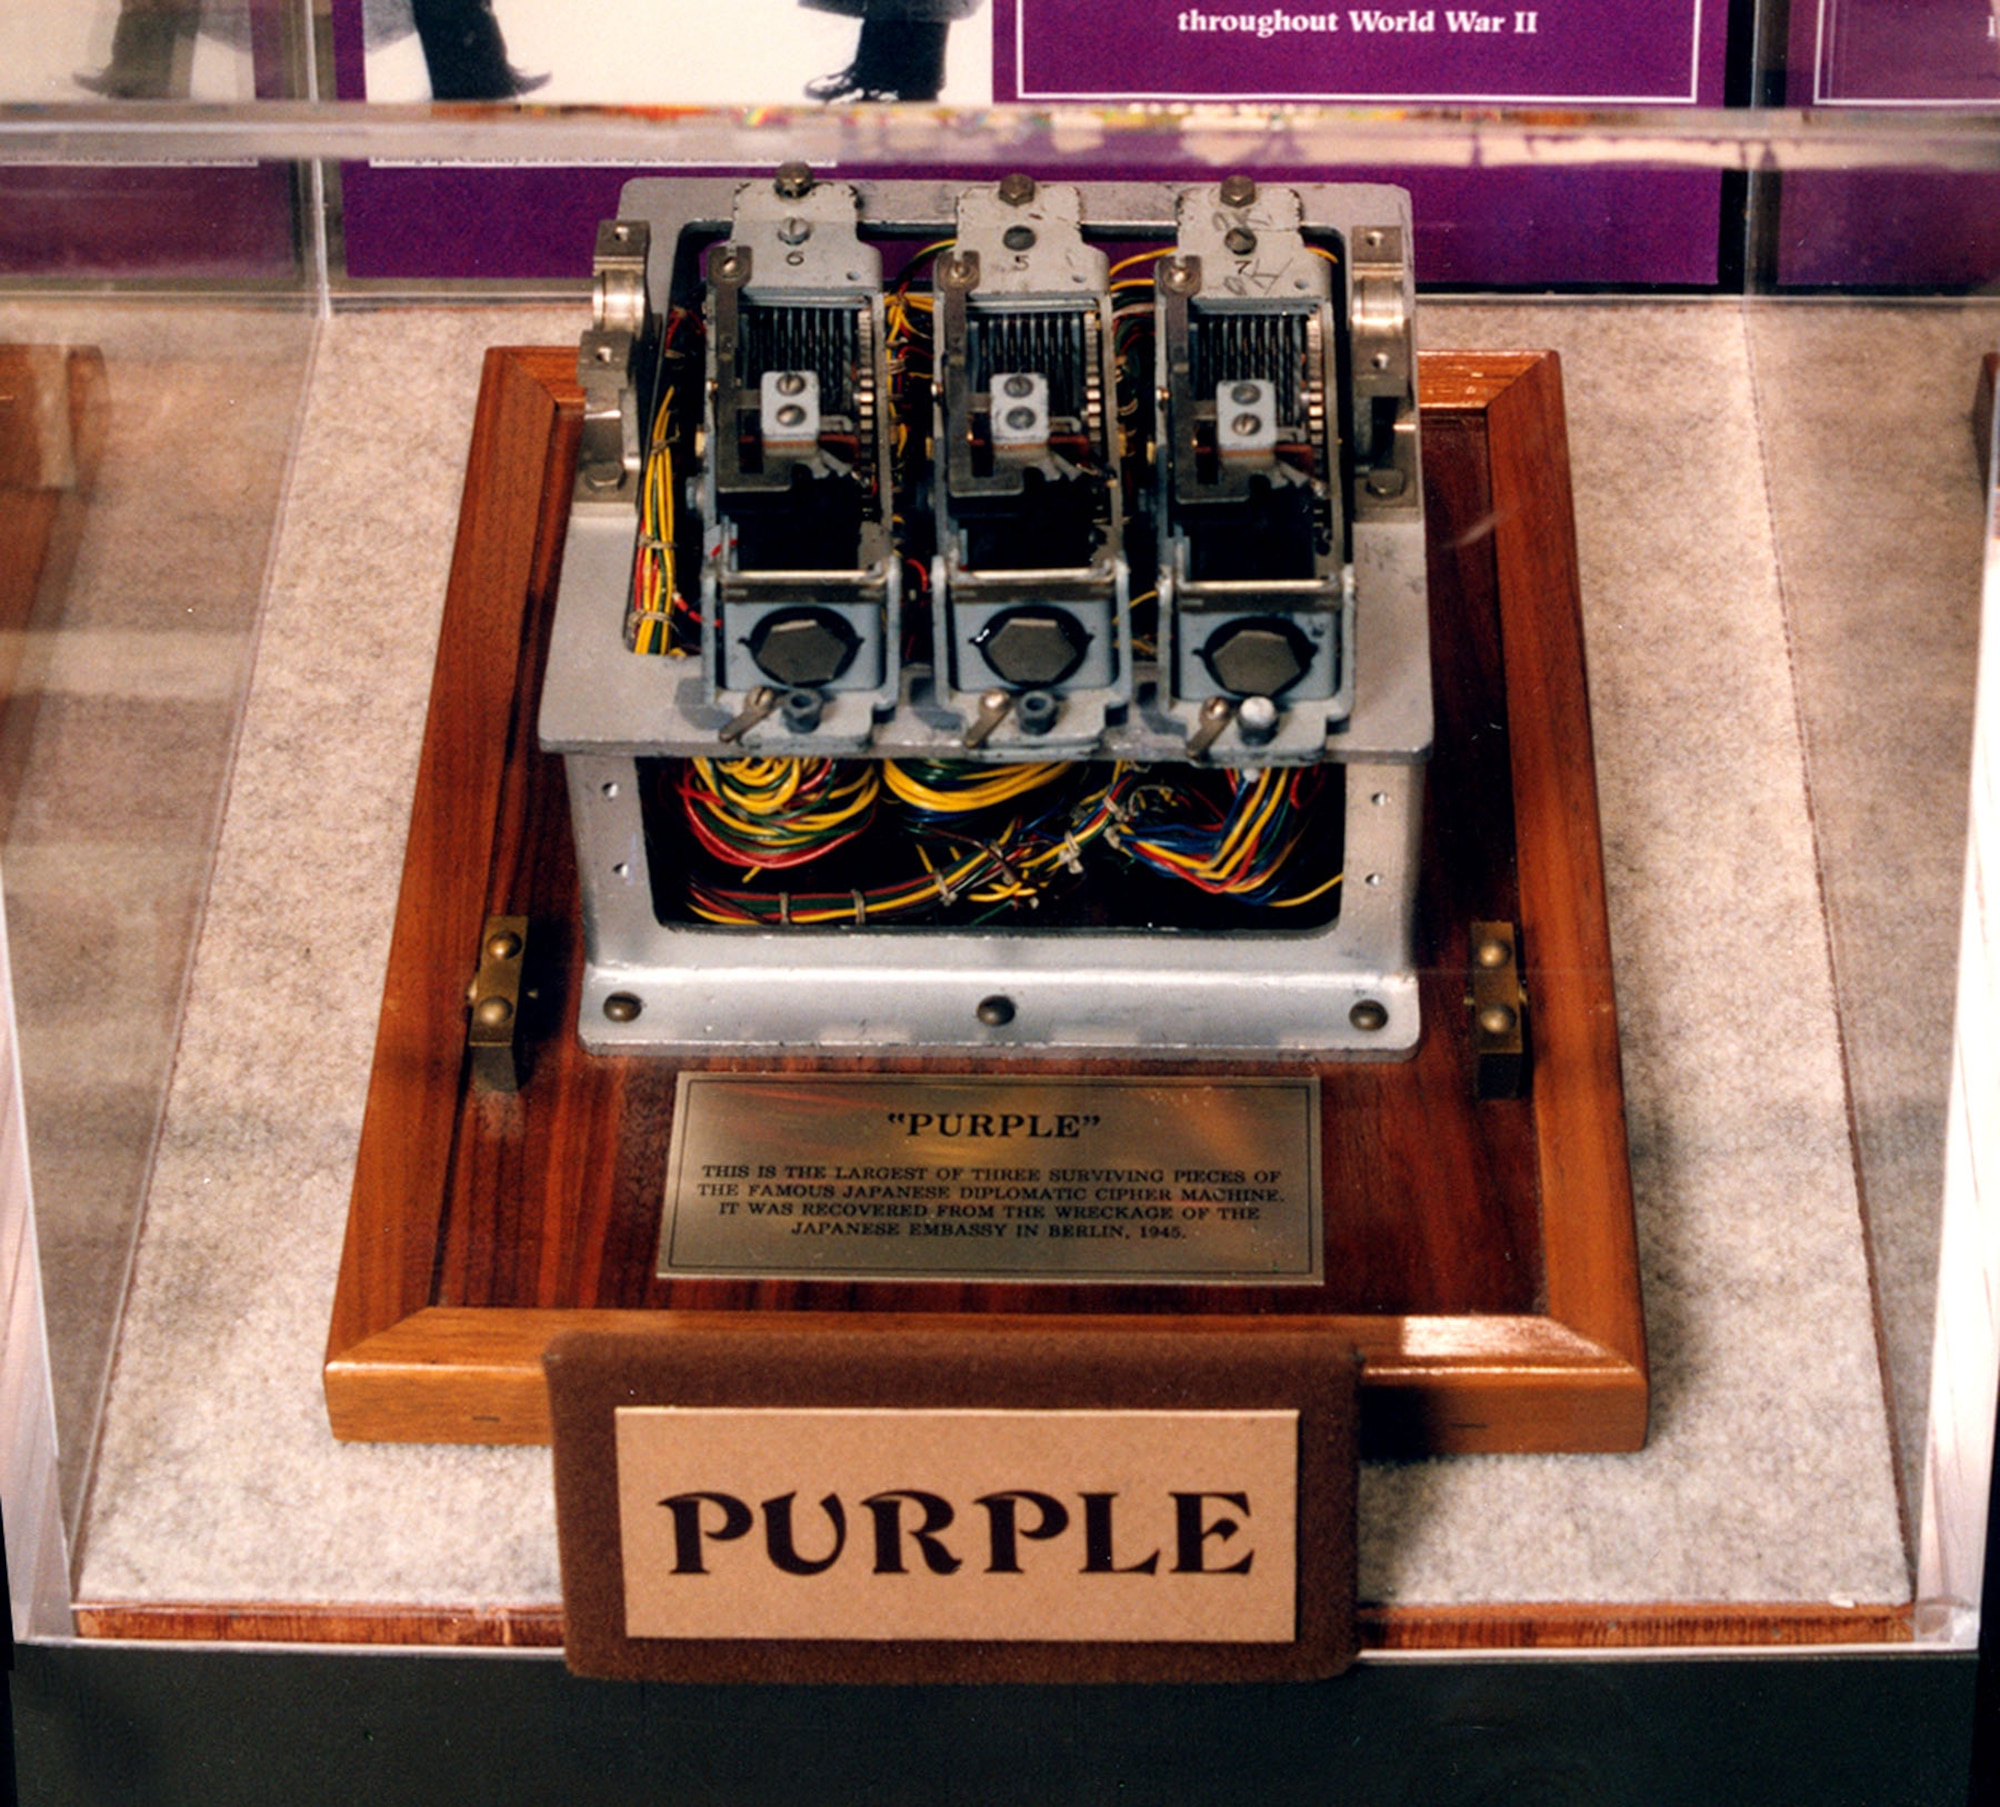 The Japanese PURPLE machine. At the end of World War II, the Japanese destroyed nearly all of their code machines, and very few parts exist today. This fragment is on display at the National Cryptologic Museum in Washington, D.C. (Photo courtesy of National Cryptologic Museum, NSA)